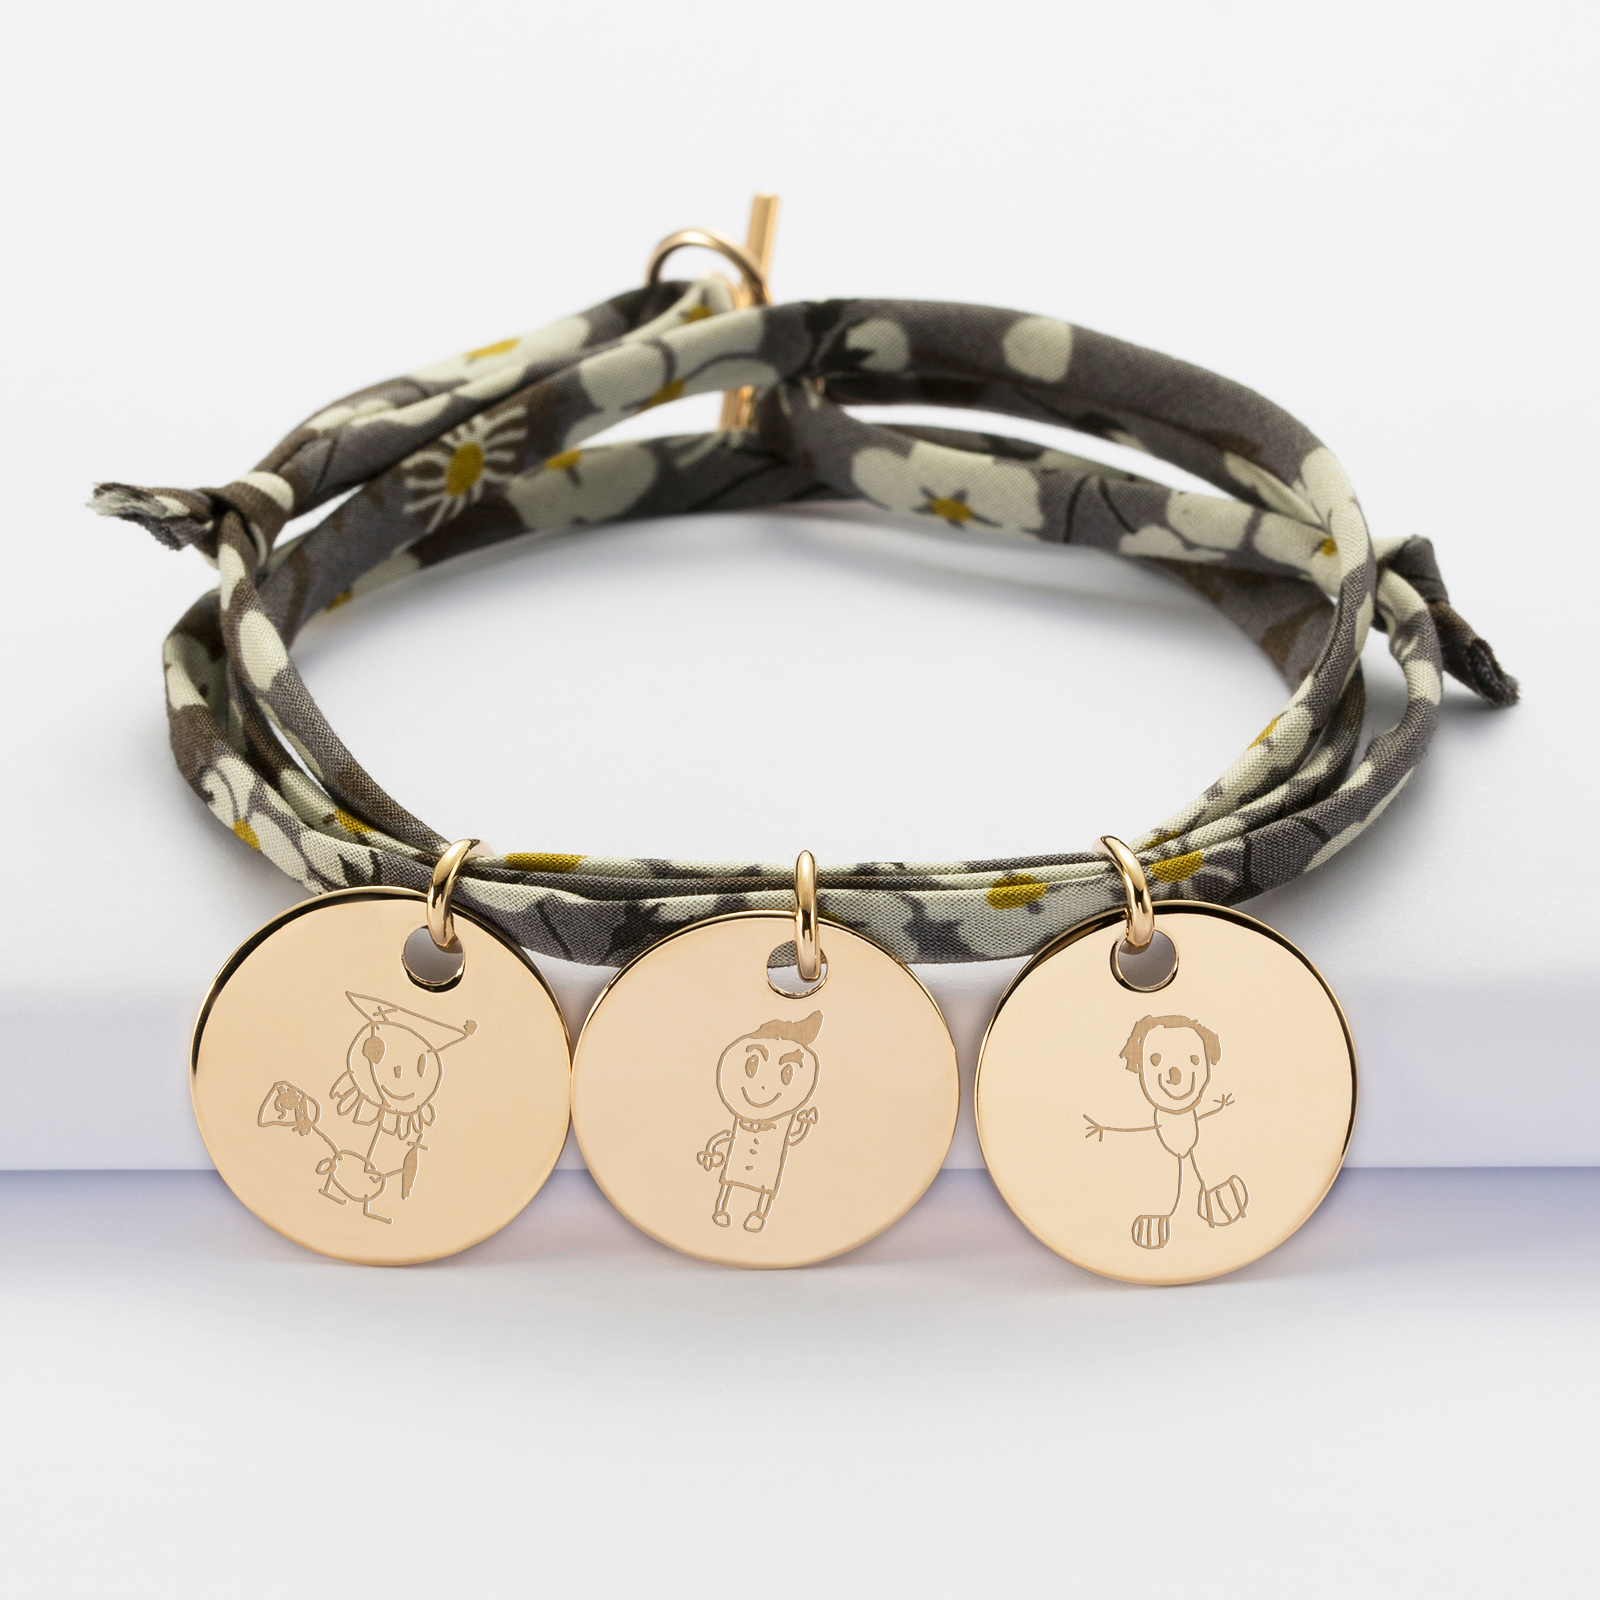 Liberty 3 turn bracelet with 3 personalised engraved gold plated medallions 19 mm - sketches